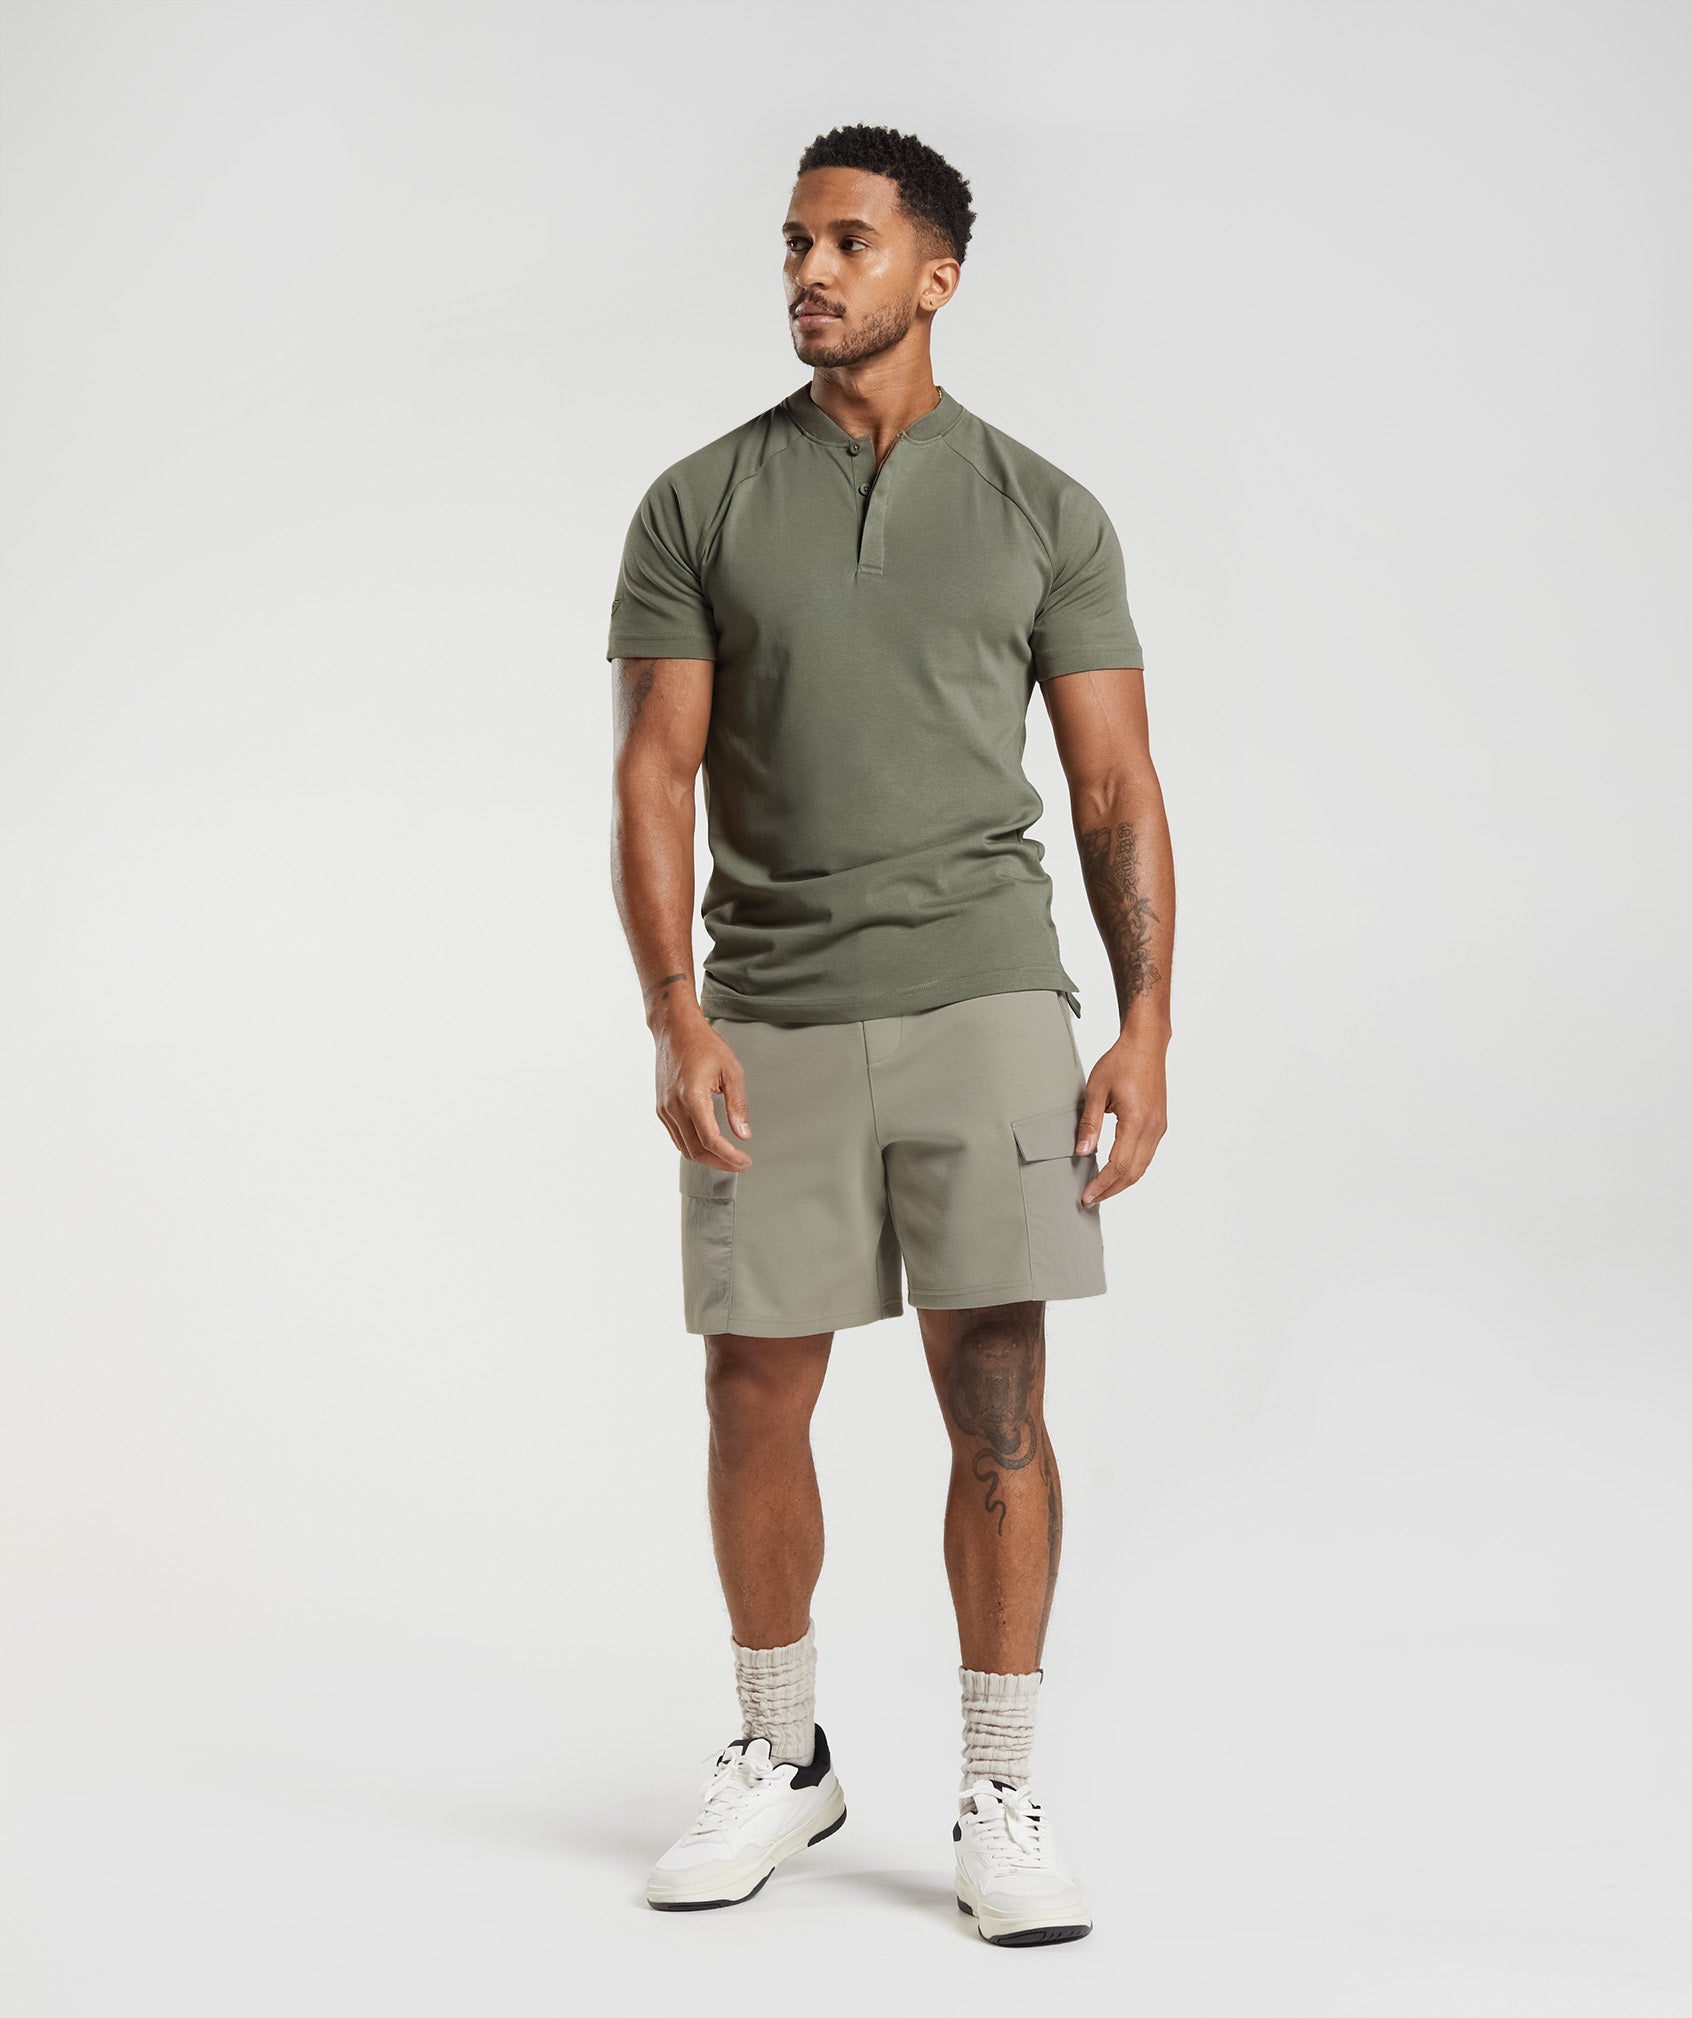 Rest Day Commute Polo Shirt in Dusty Olive - view 4